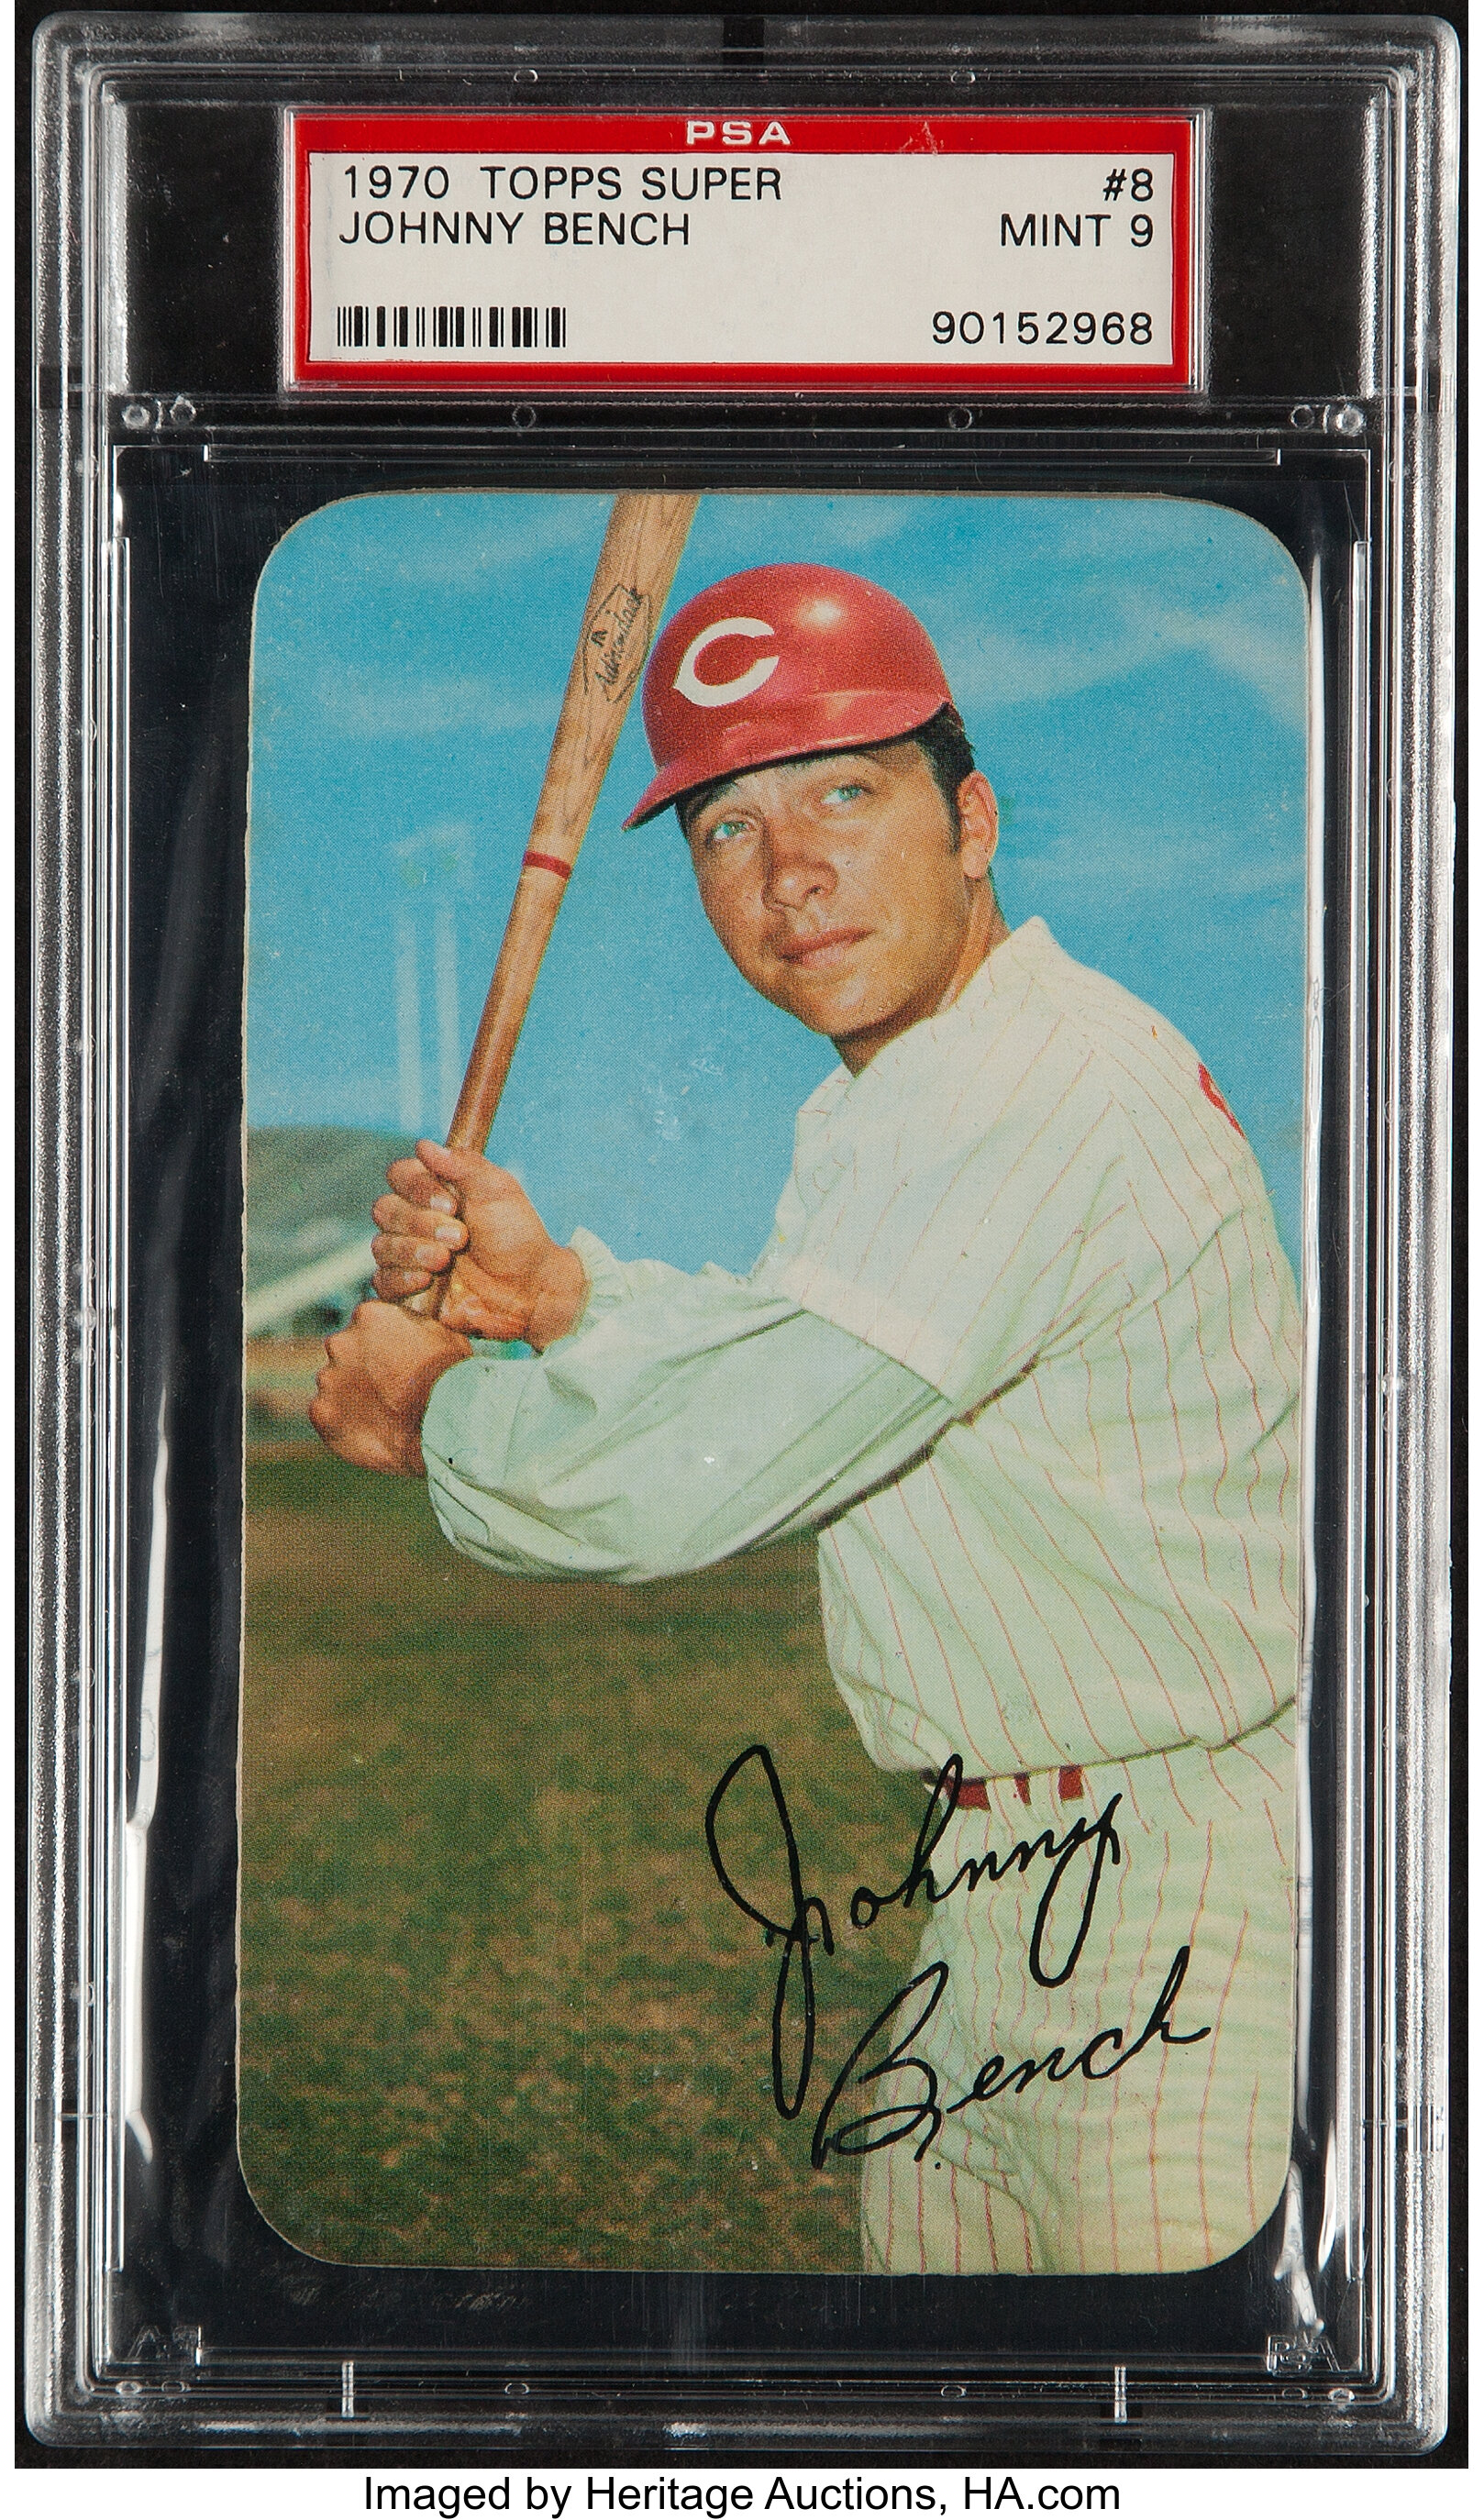 25 Most Watched Johnny Bench Baseball Cards on